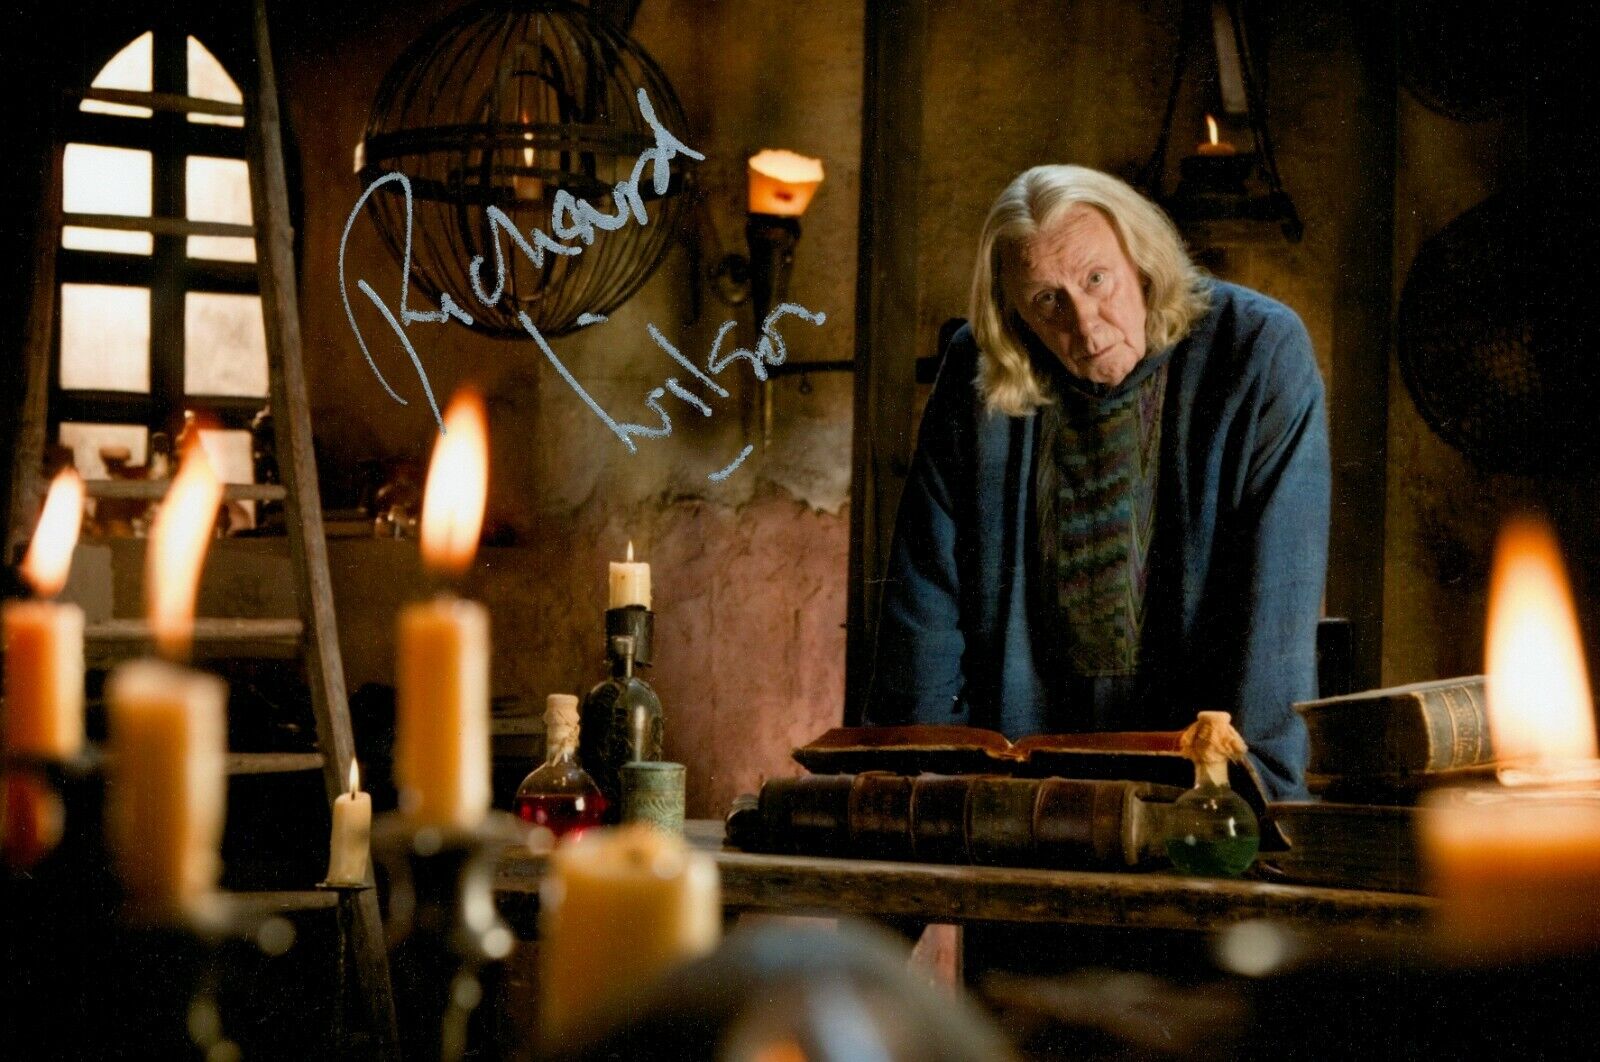 Richard Wilson Signed 6x4 Photo Poster painting Merlin One Foot in the Grave Autograph + COA